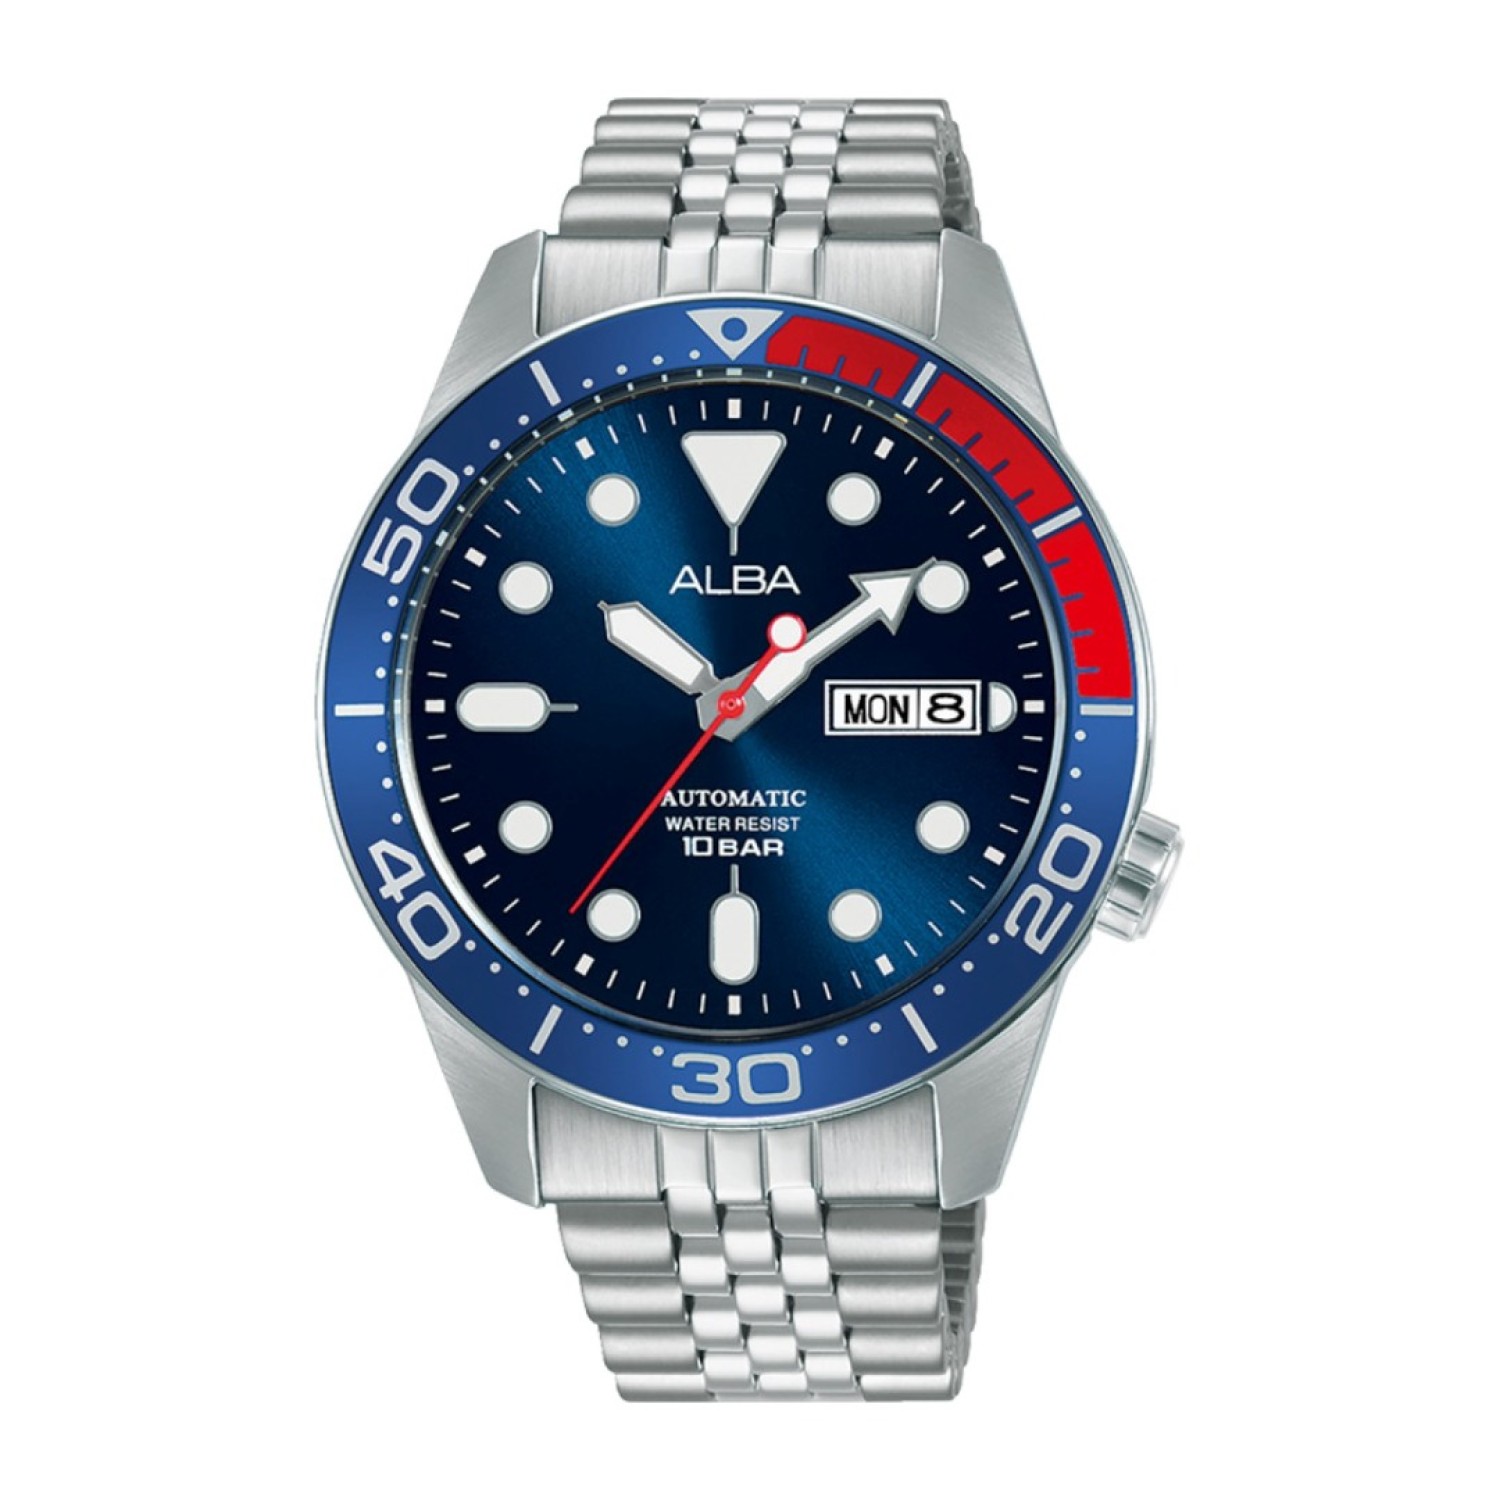 AL4191X1-ALBA MENS BLUE DIAL WATCH. Alba AL4191X1  is an elegant and stylish mens analog watch that combines classic design with modern technology.